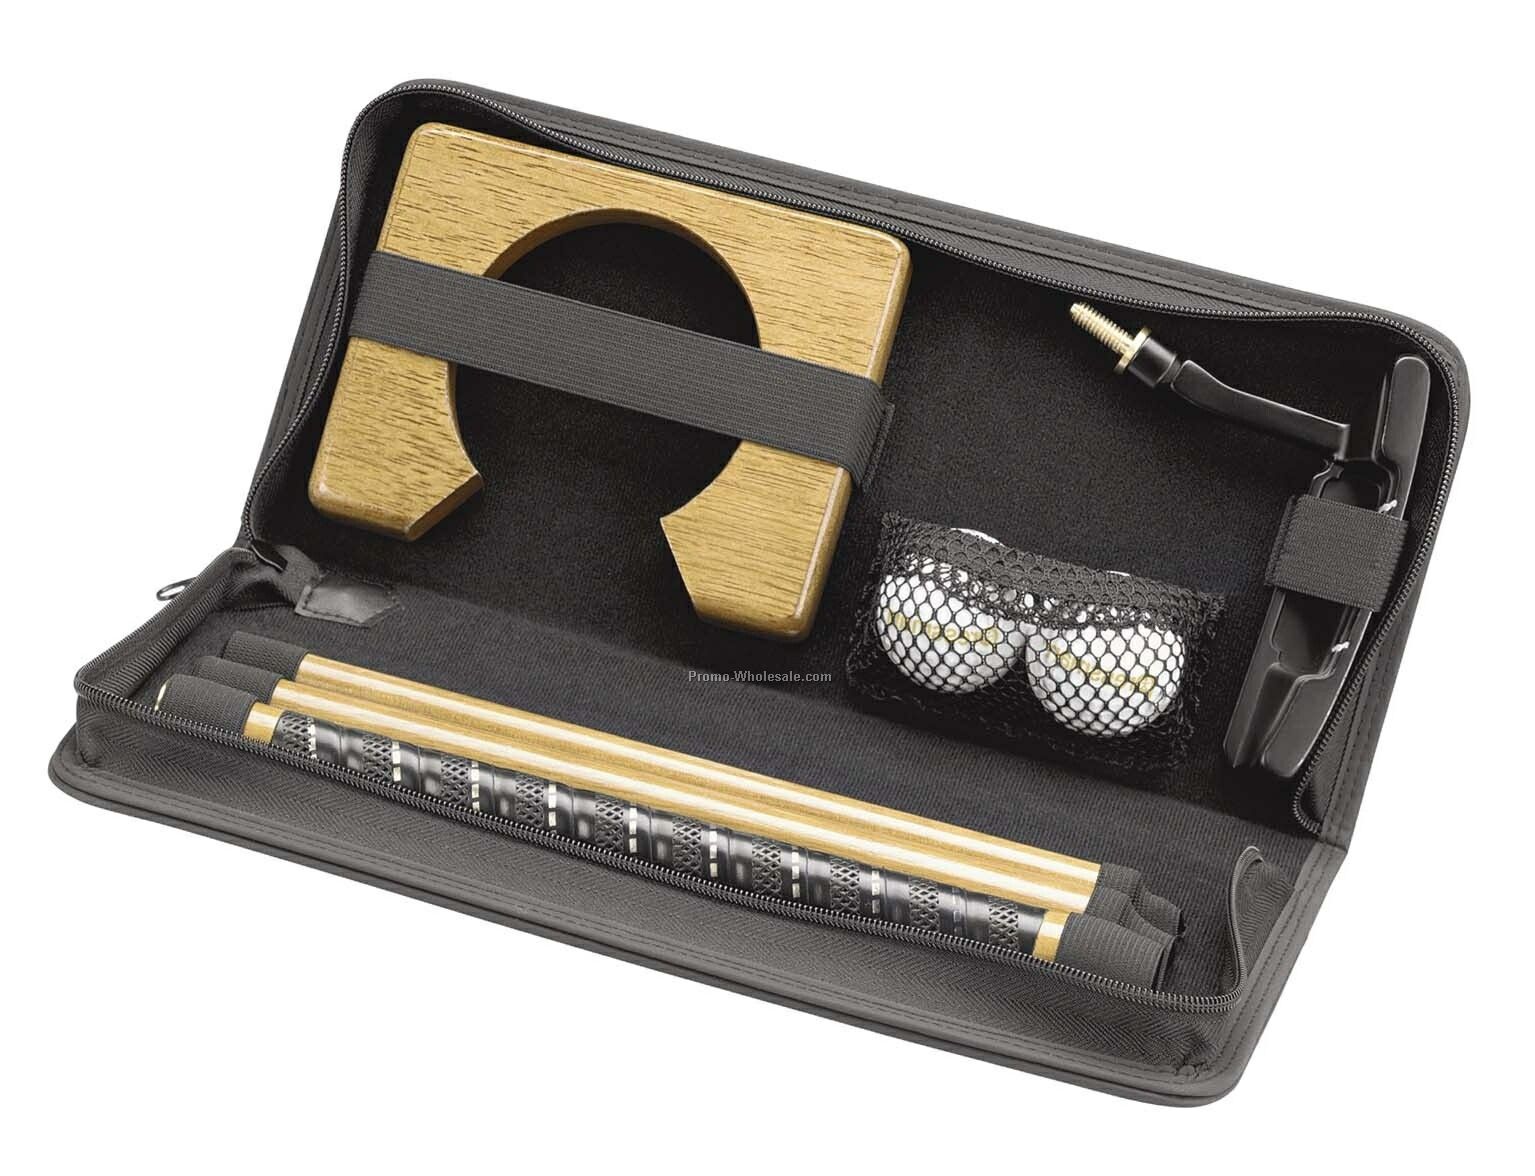 Tee Off Wood Executive Putter Kit With Titleist Dt Roll Golf Balls